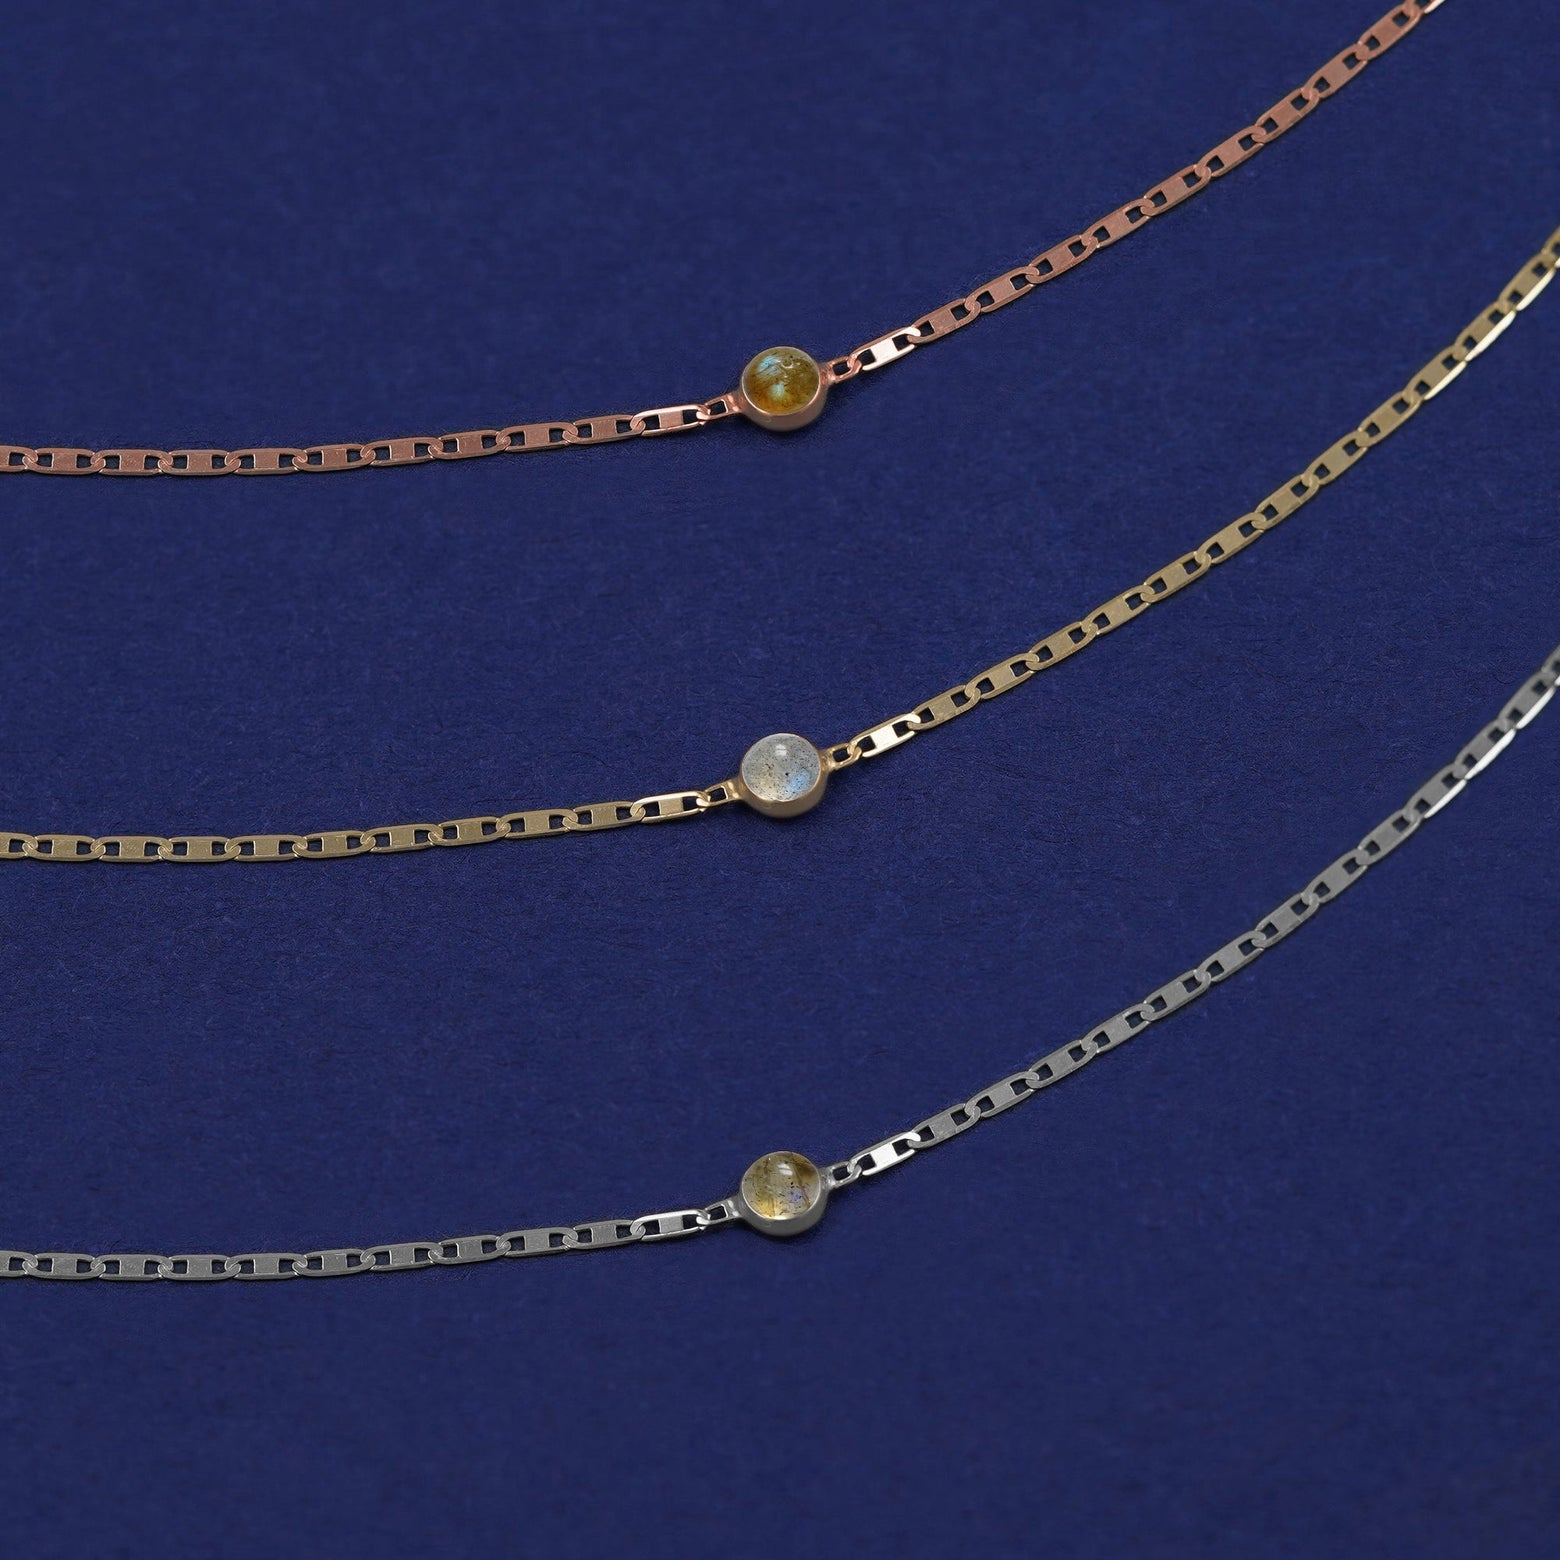 Three Labradorite Bracelets shown in options of rose, yellow, and white gold